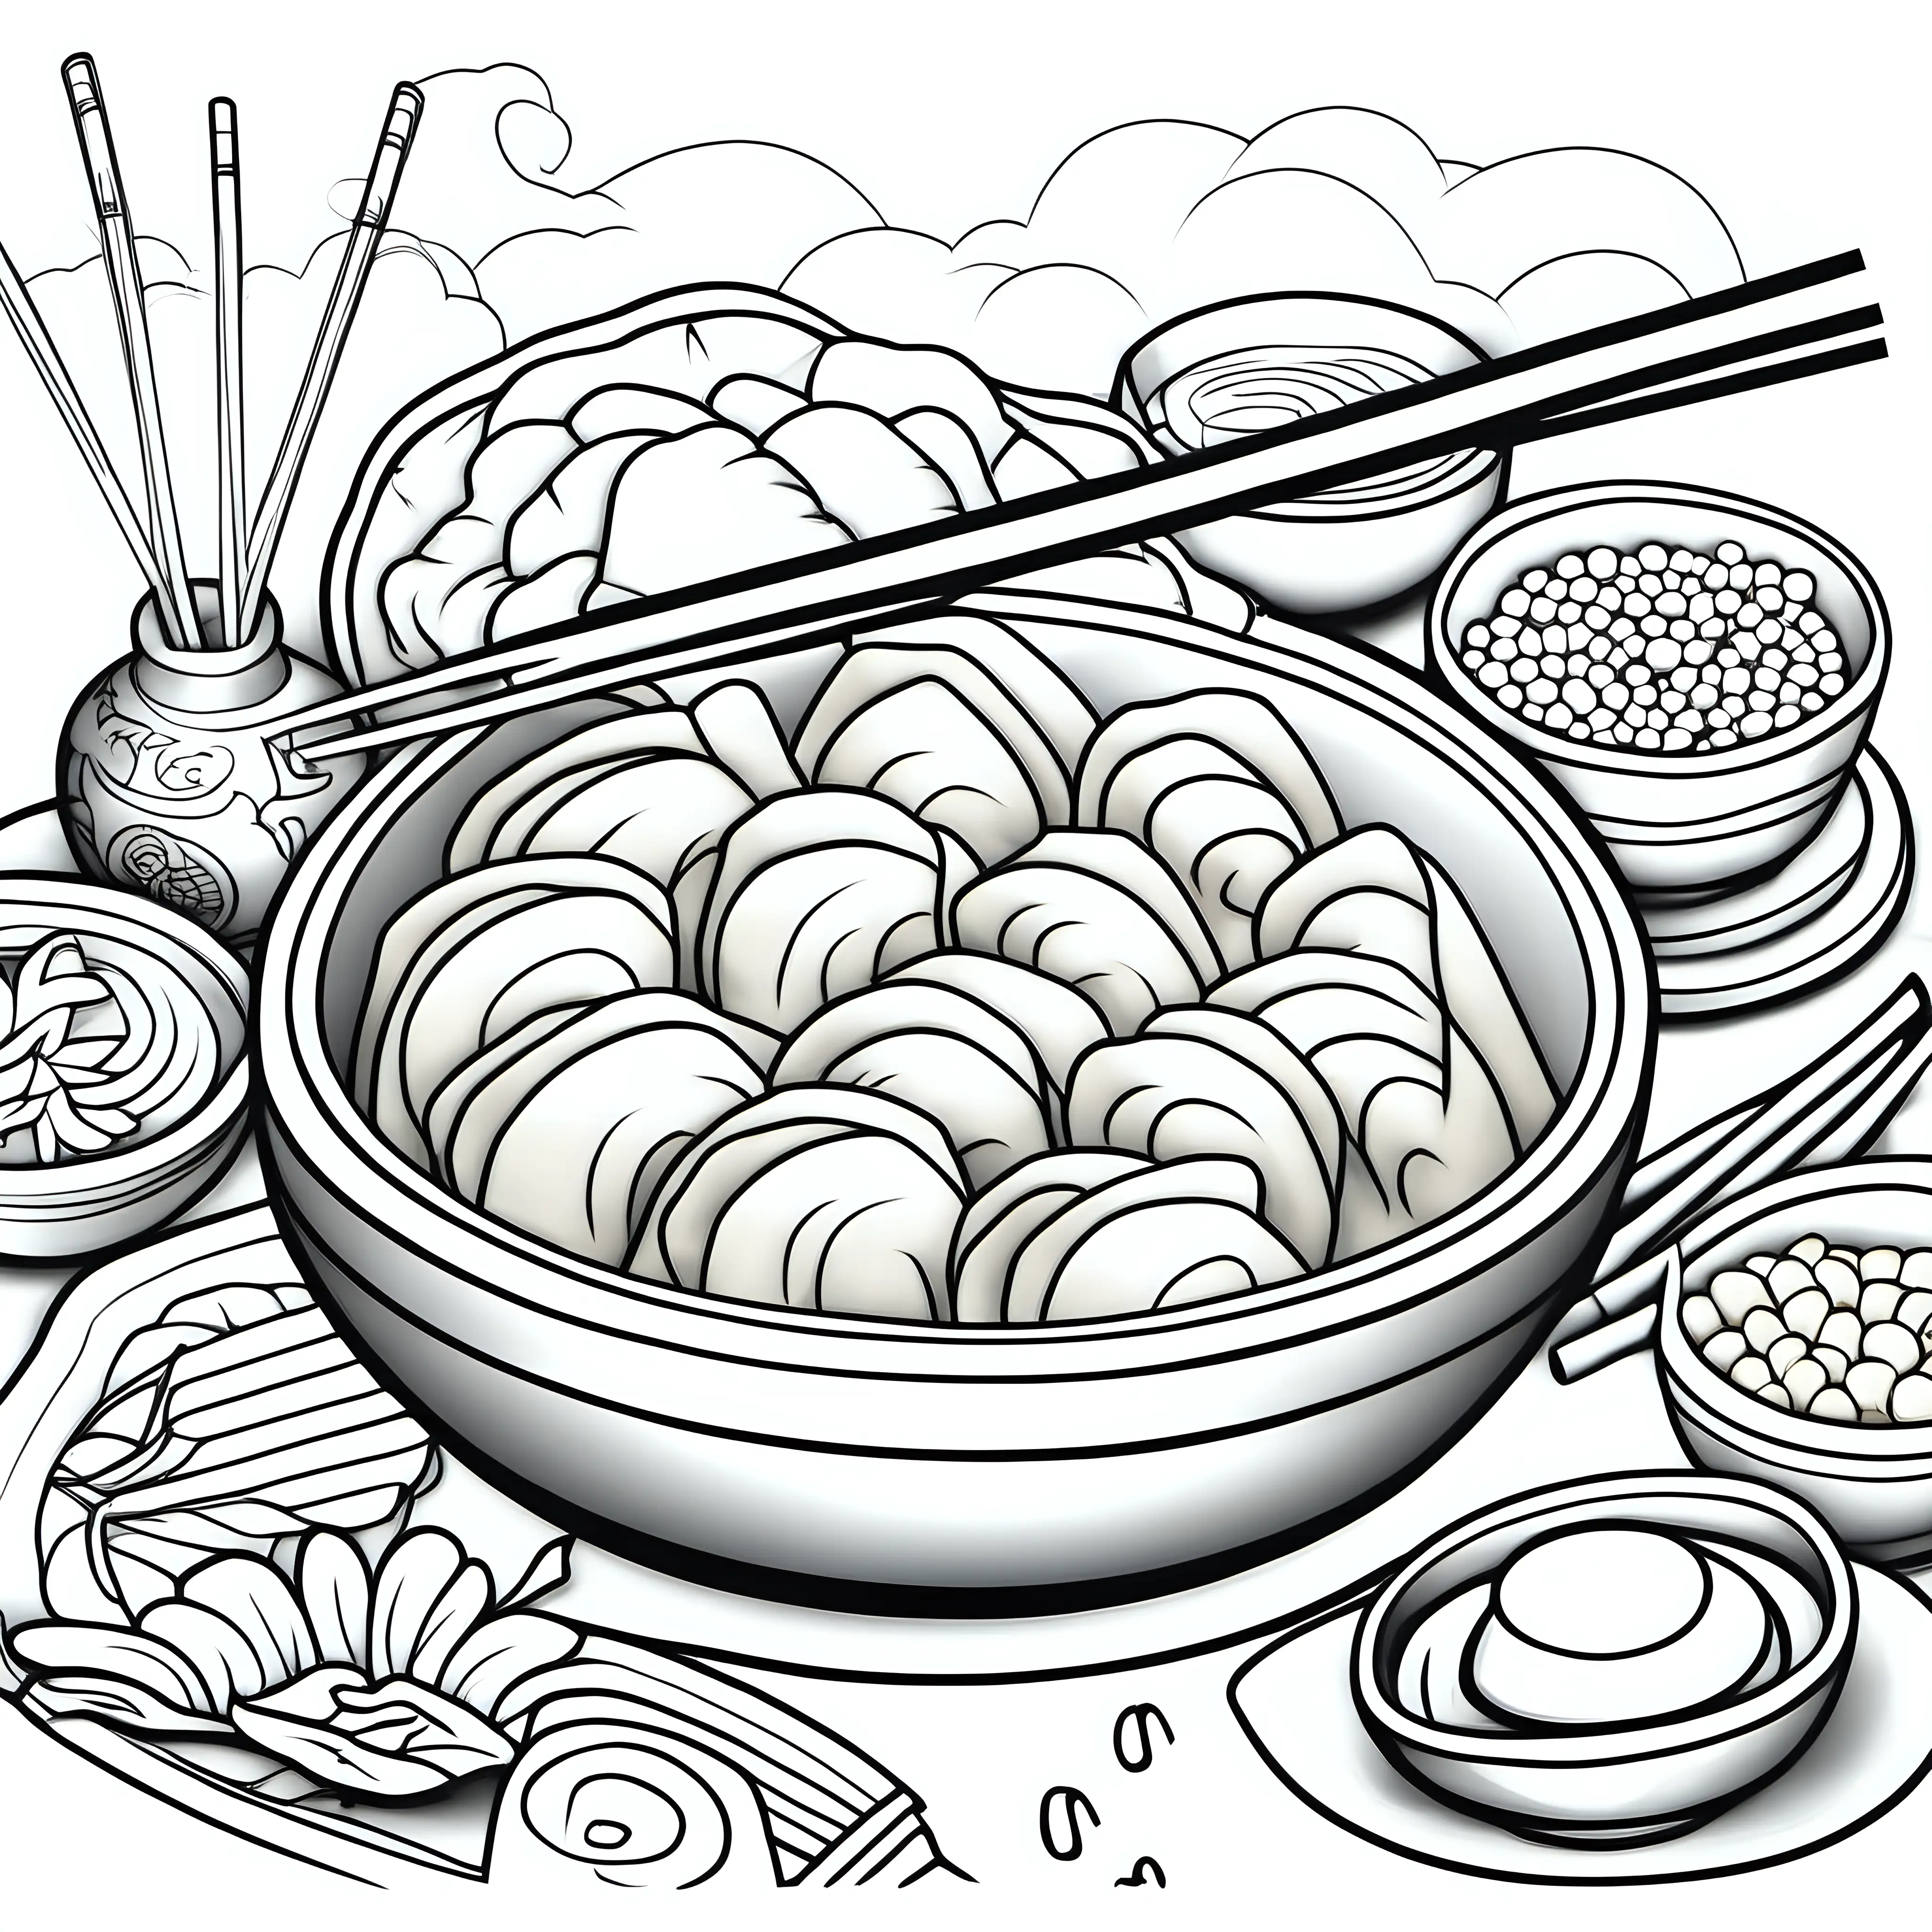 colouring page for kids, Kids illustration, low detail, no shading, Chinese New Year, dumpling

